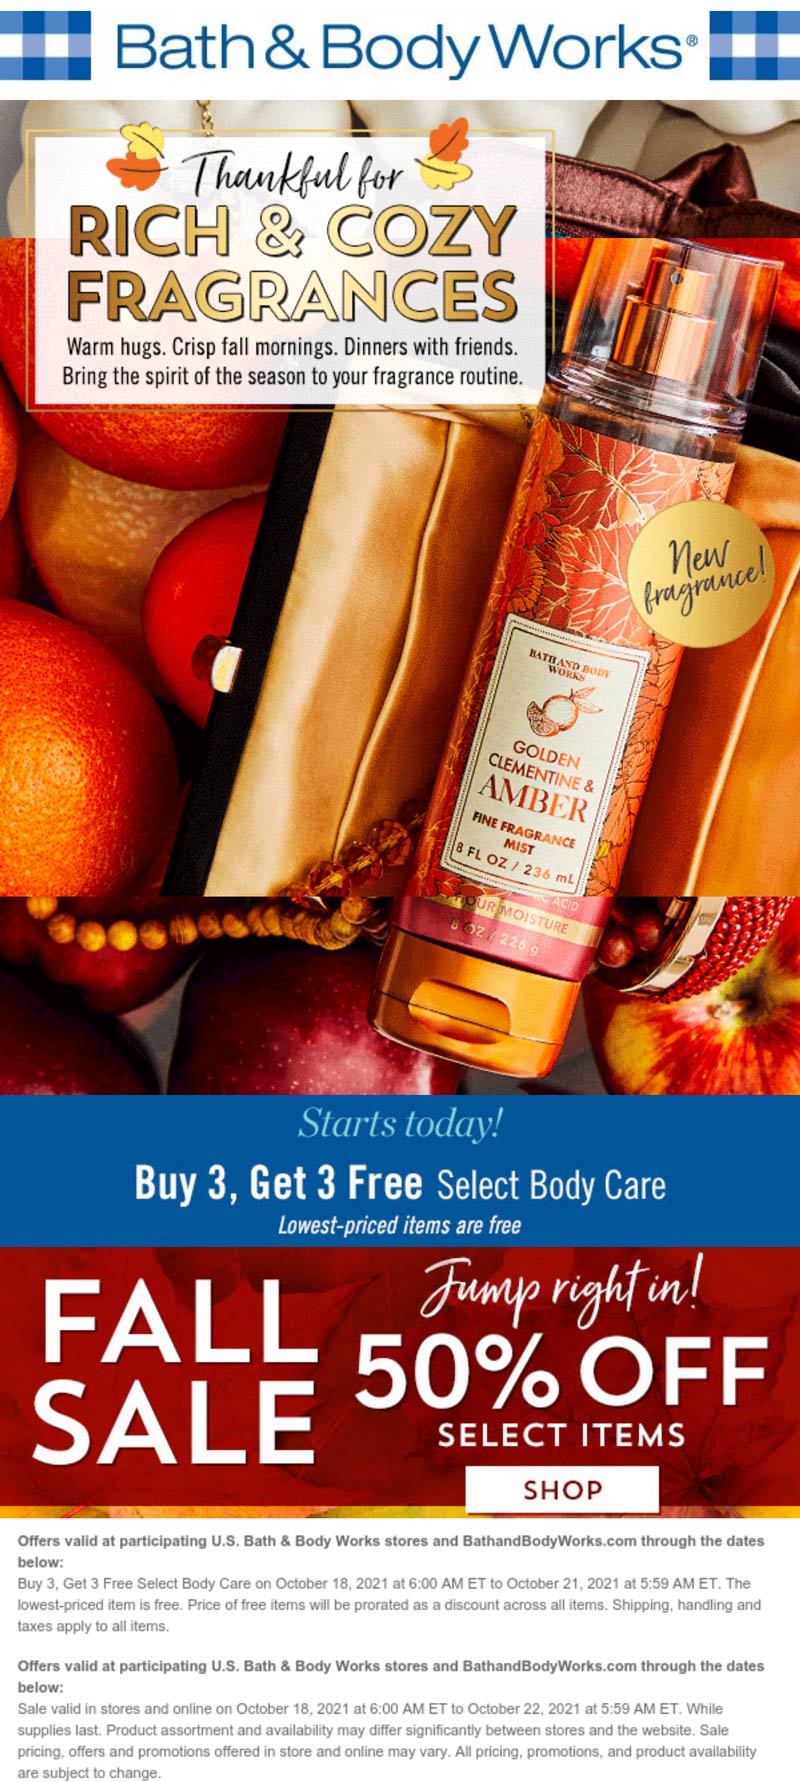 Bath & Body Works stores Coupon  6-for-3 on body care at Bath & Body Works, ditto online #bathbodyworks 